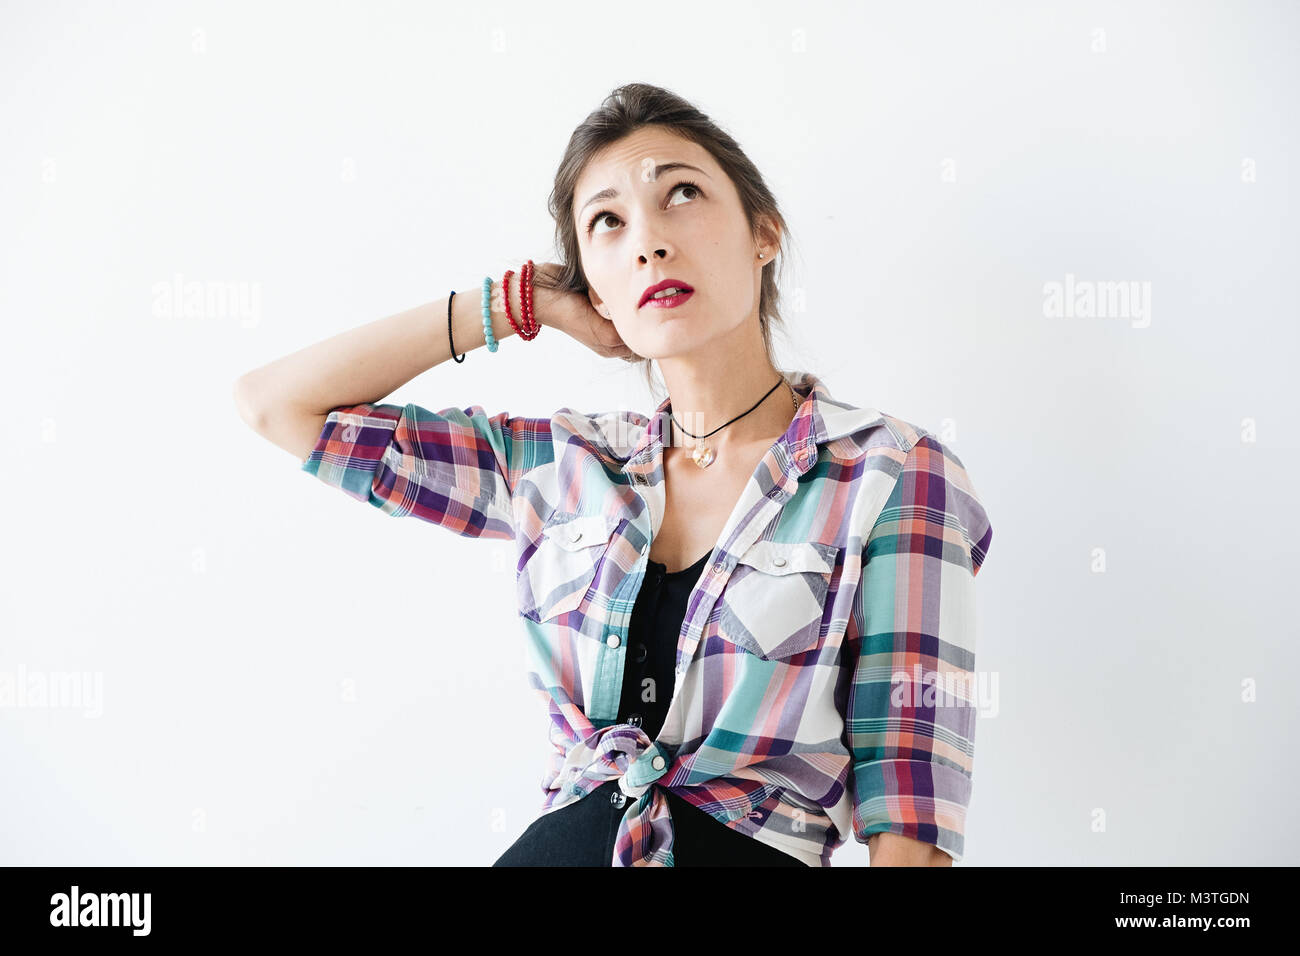 Worried tanned young woman wearing plaid shirt bite her lip and looks up, with copy space above her head. Thoughtful girl holds one arm on her head on Stock Photo